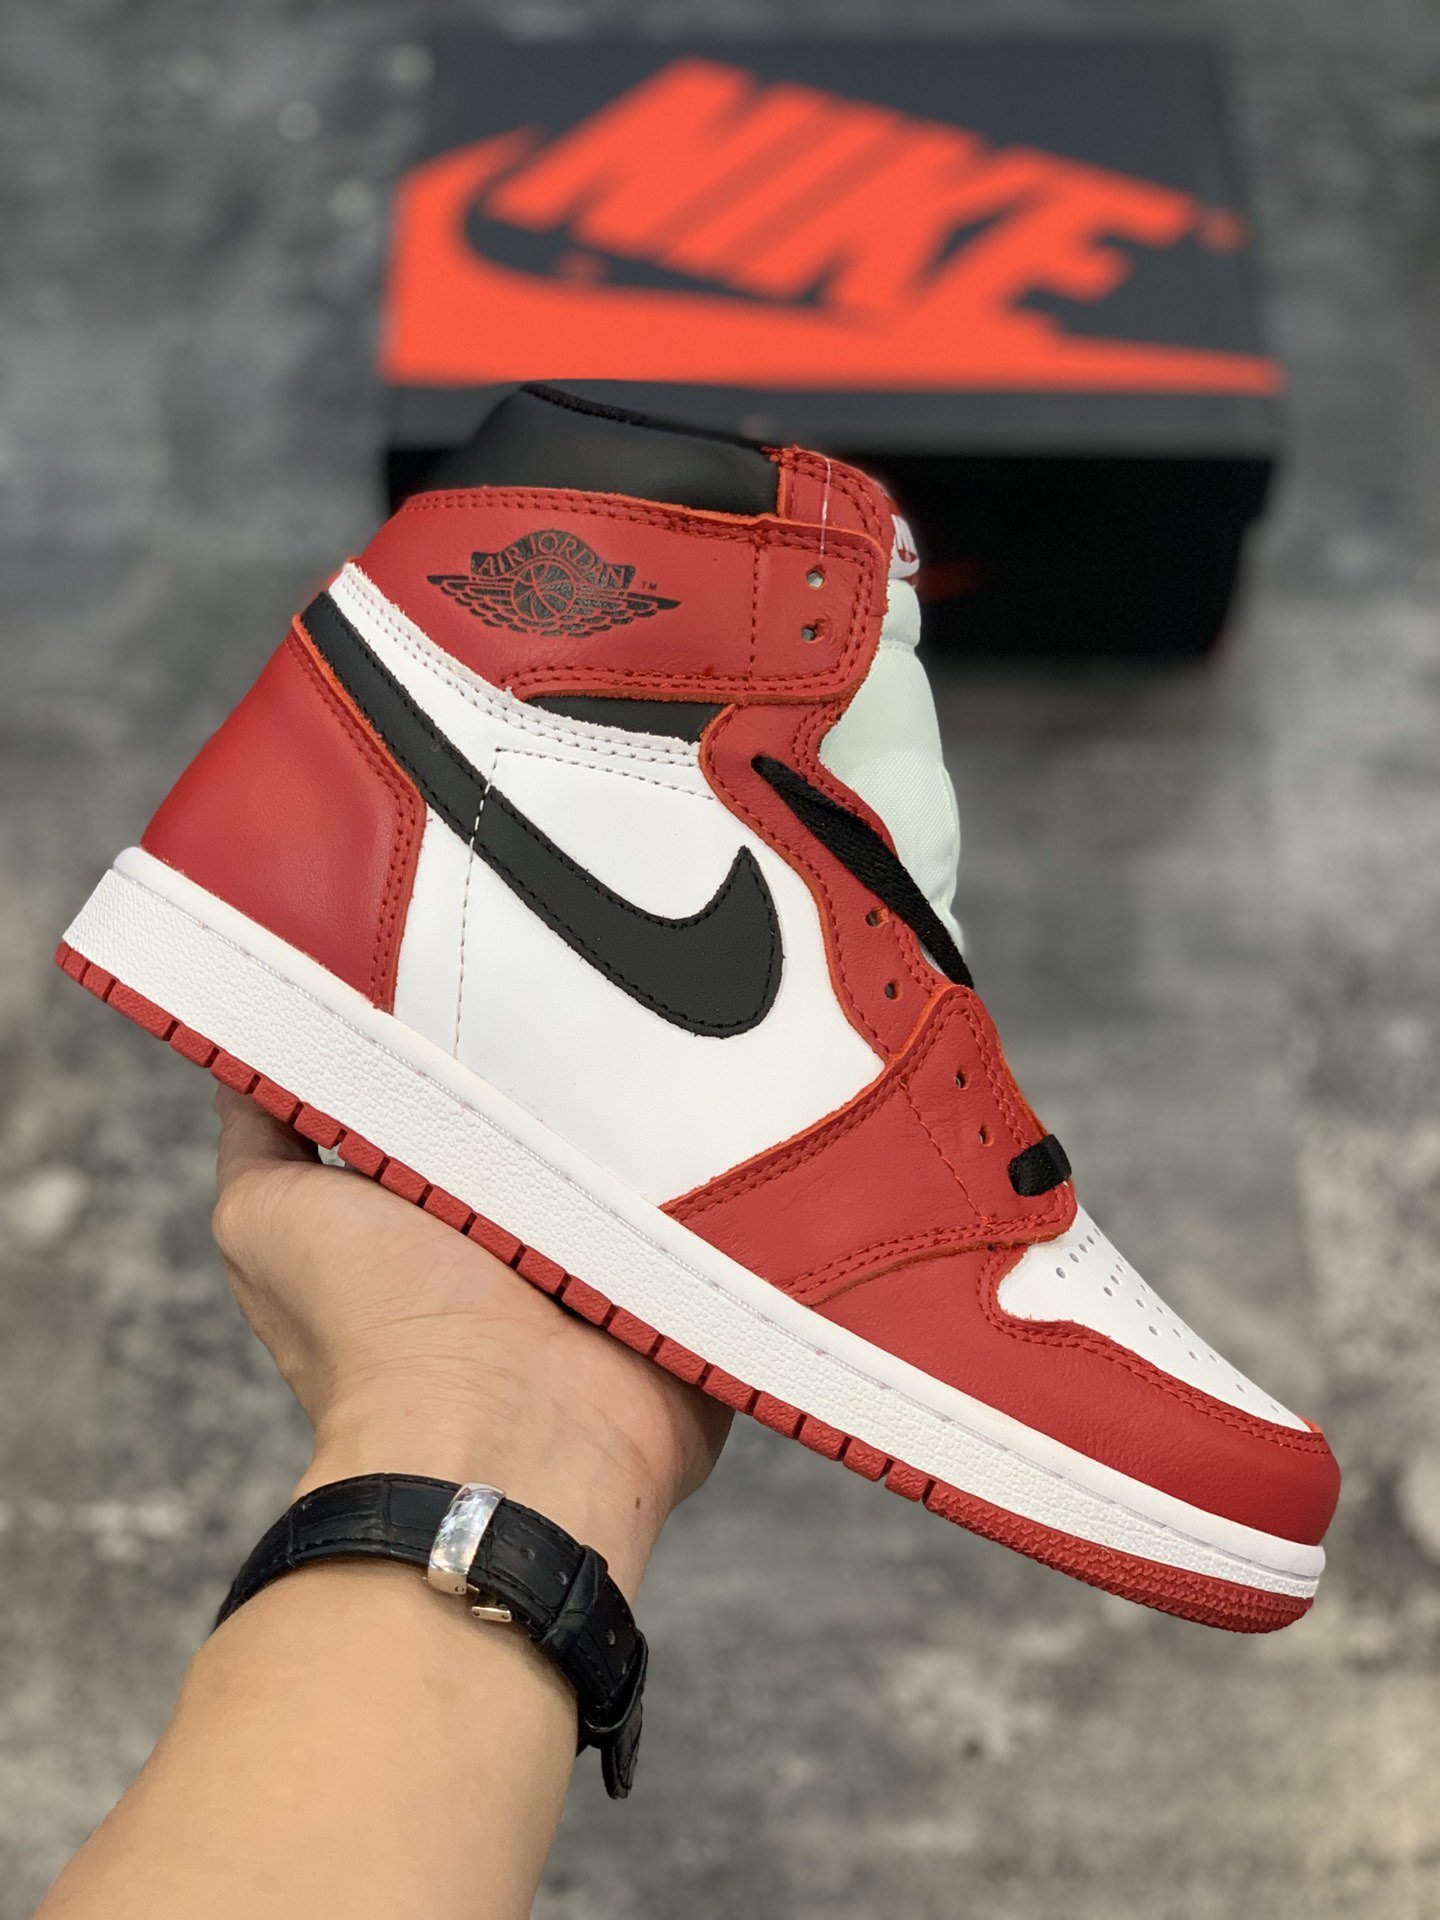 High Quality AIR JORDAN I CHICAGO  BEST VERSION with retail leather